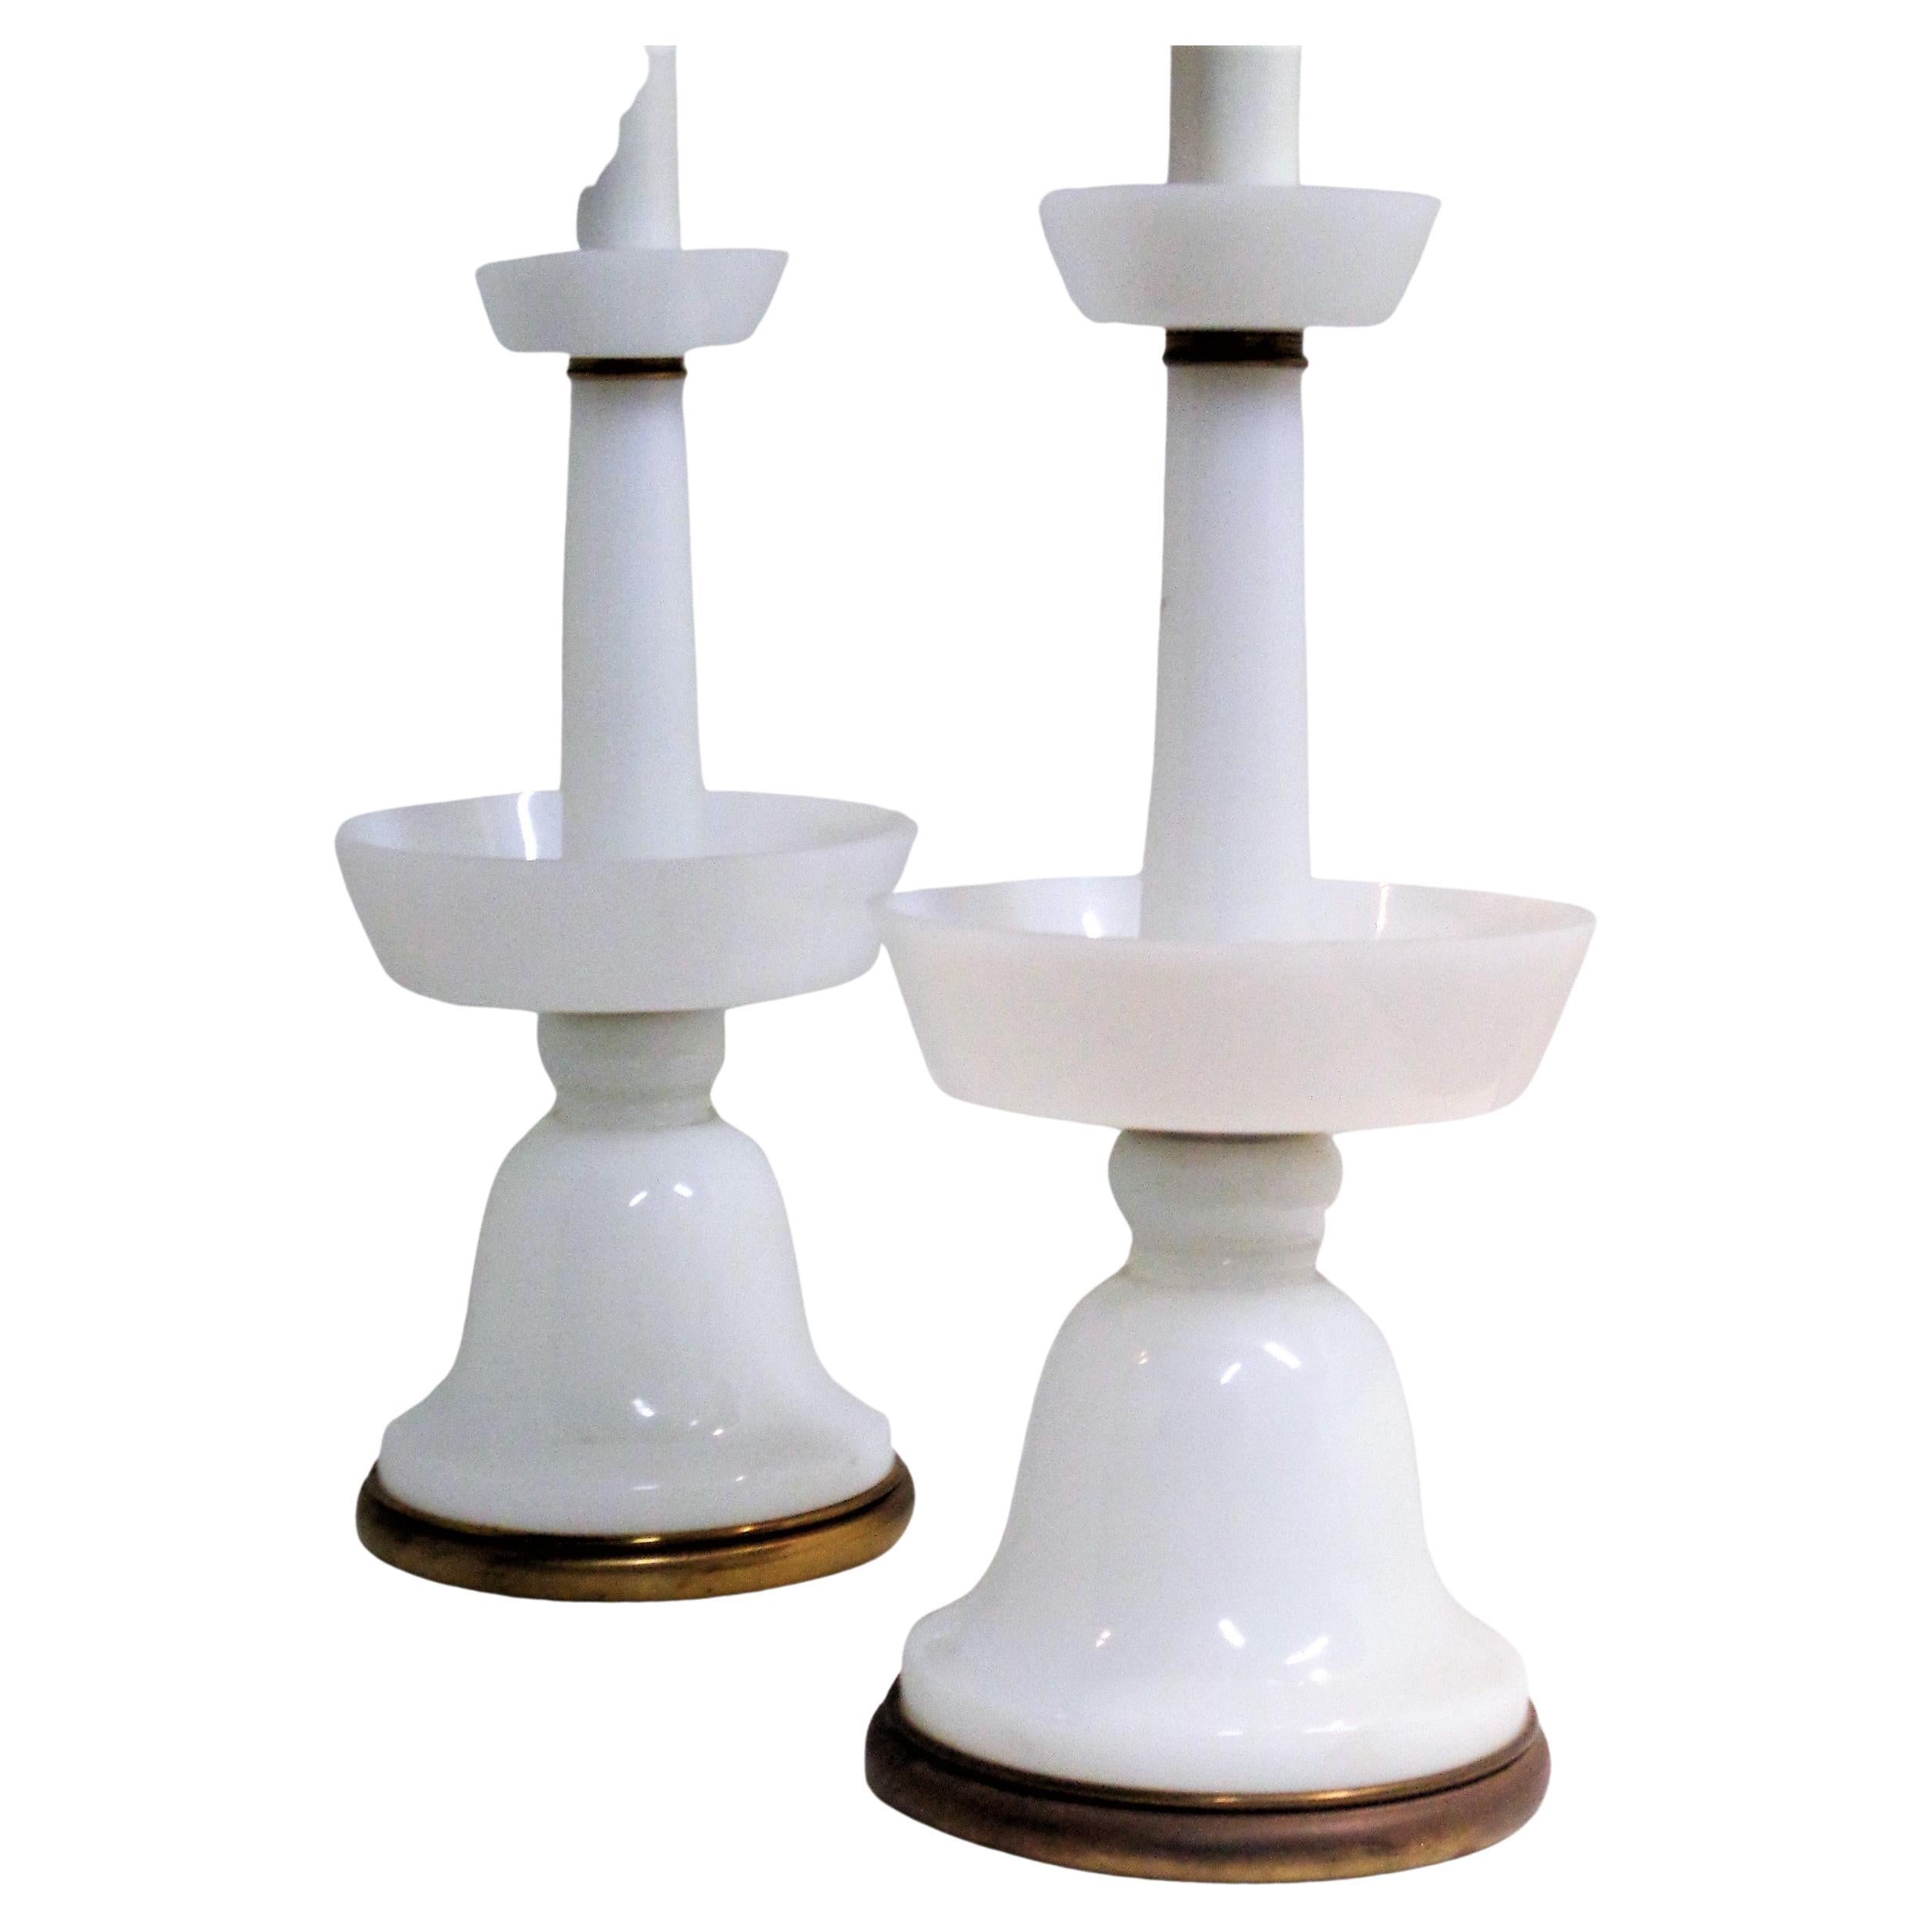 French white opaline glass fountain form table lamps w/ brass fittings and white enameled metal upper rods. Original vintage condition. Circa 1930. 38